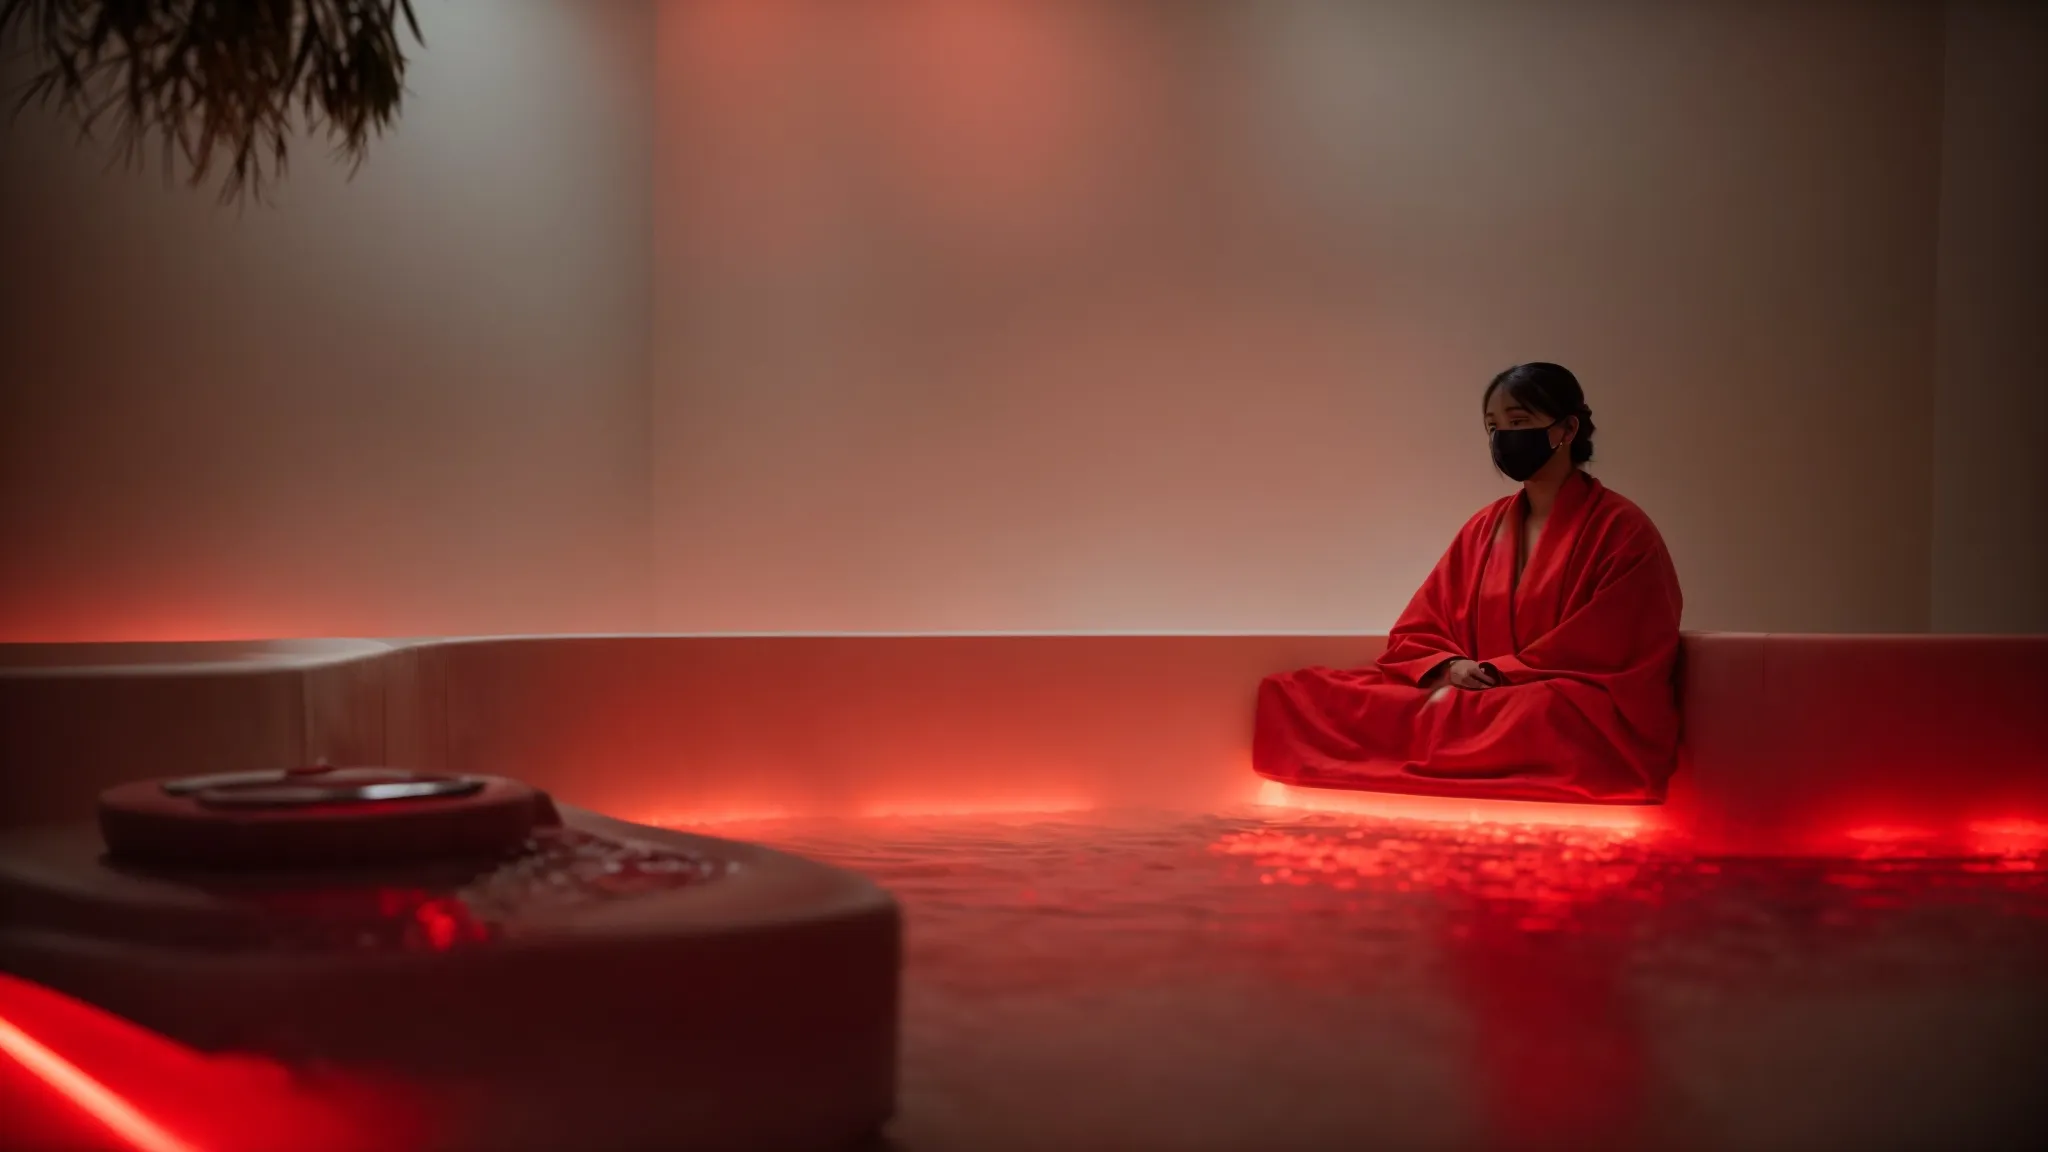 a serene spa environment with a person calmly seated, wearing a red light therapy mask, enveloped in a soft, glowing ambiance.